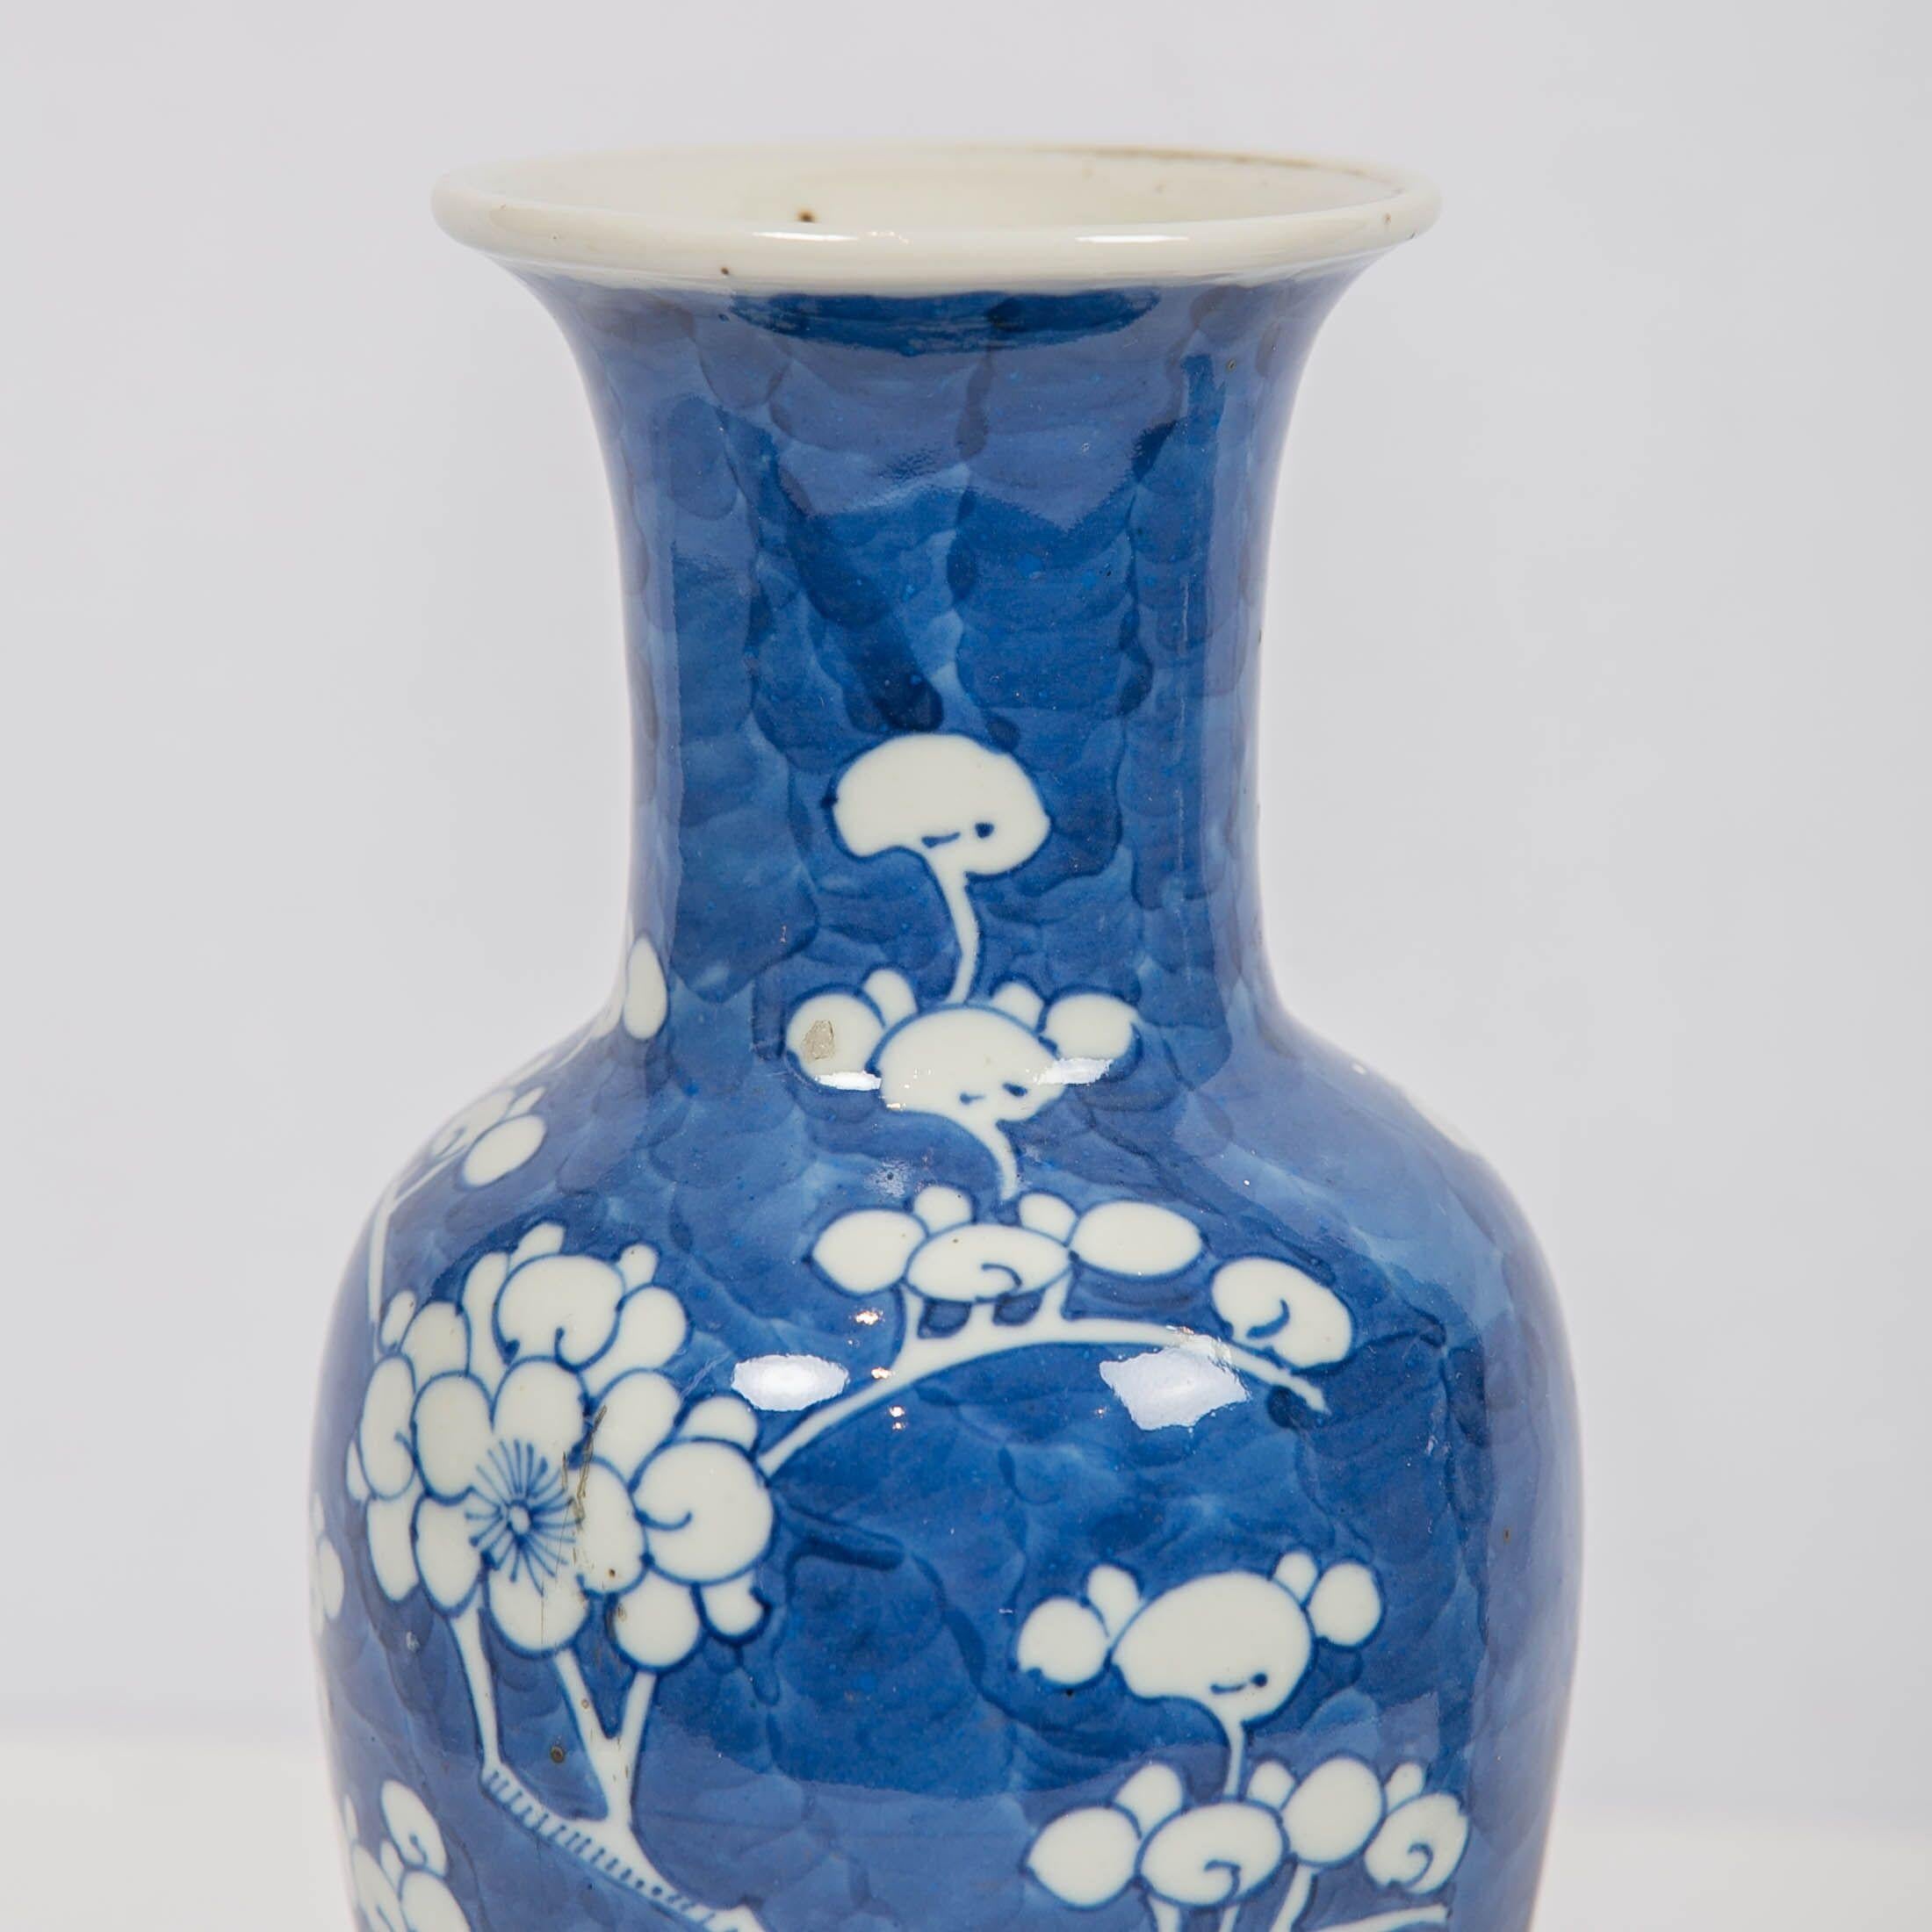 Qing Antique Chinese Blue and White Porcelain Vases Made circa 1880